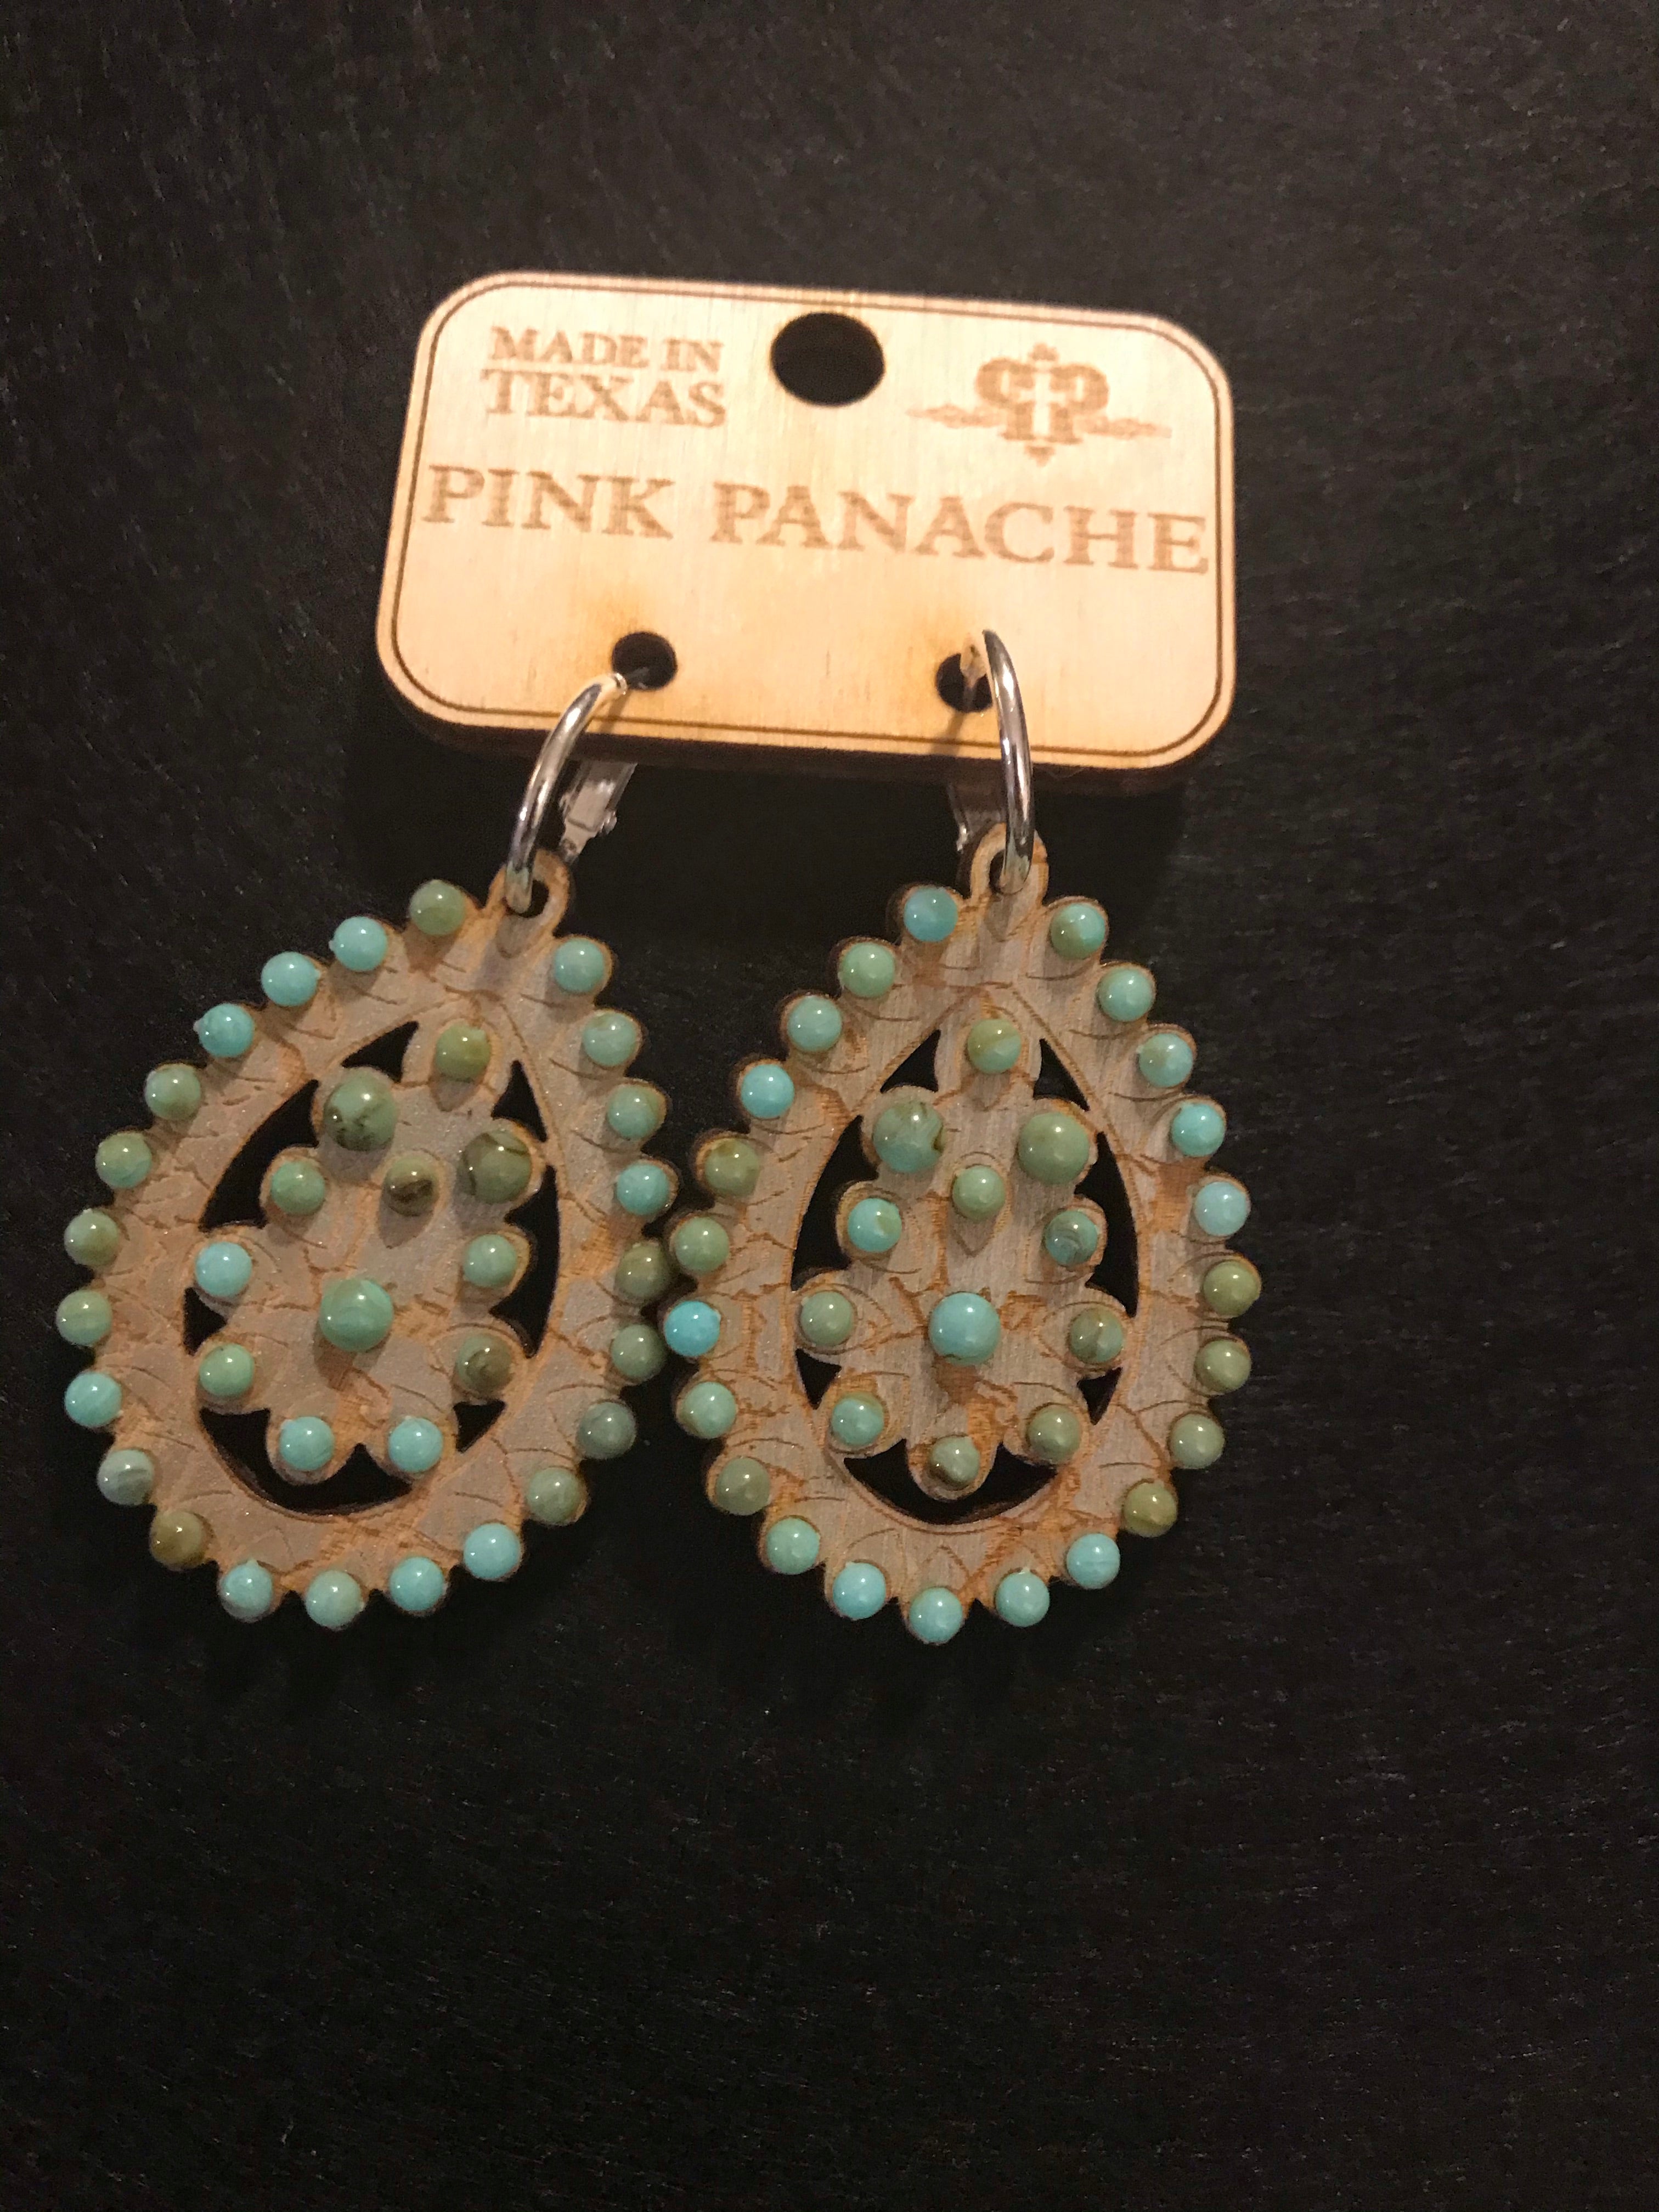 Small Santa Fe Crackle Wood with Turquoise Pink Panache Earrings